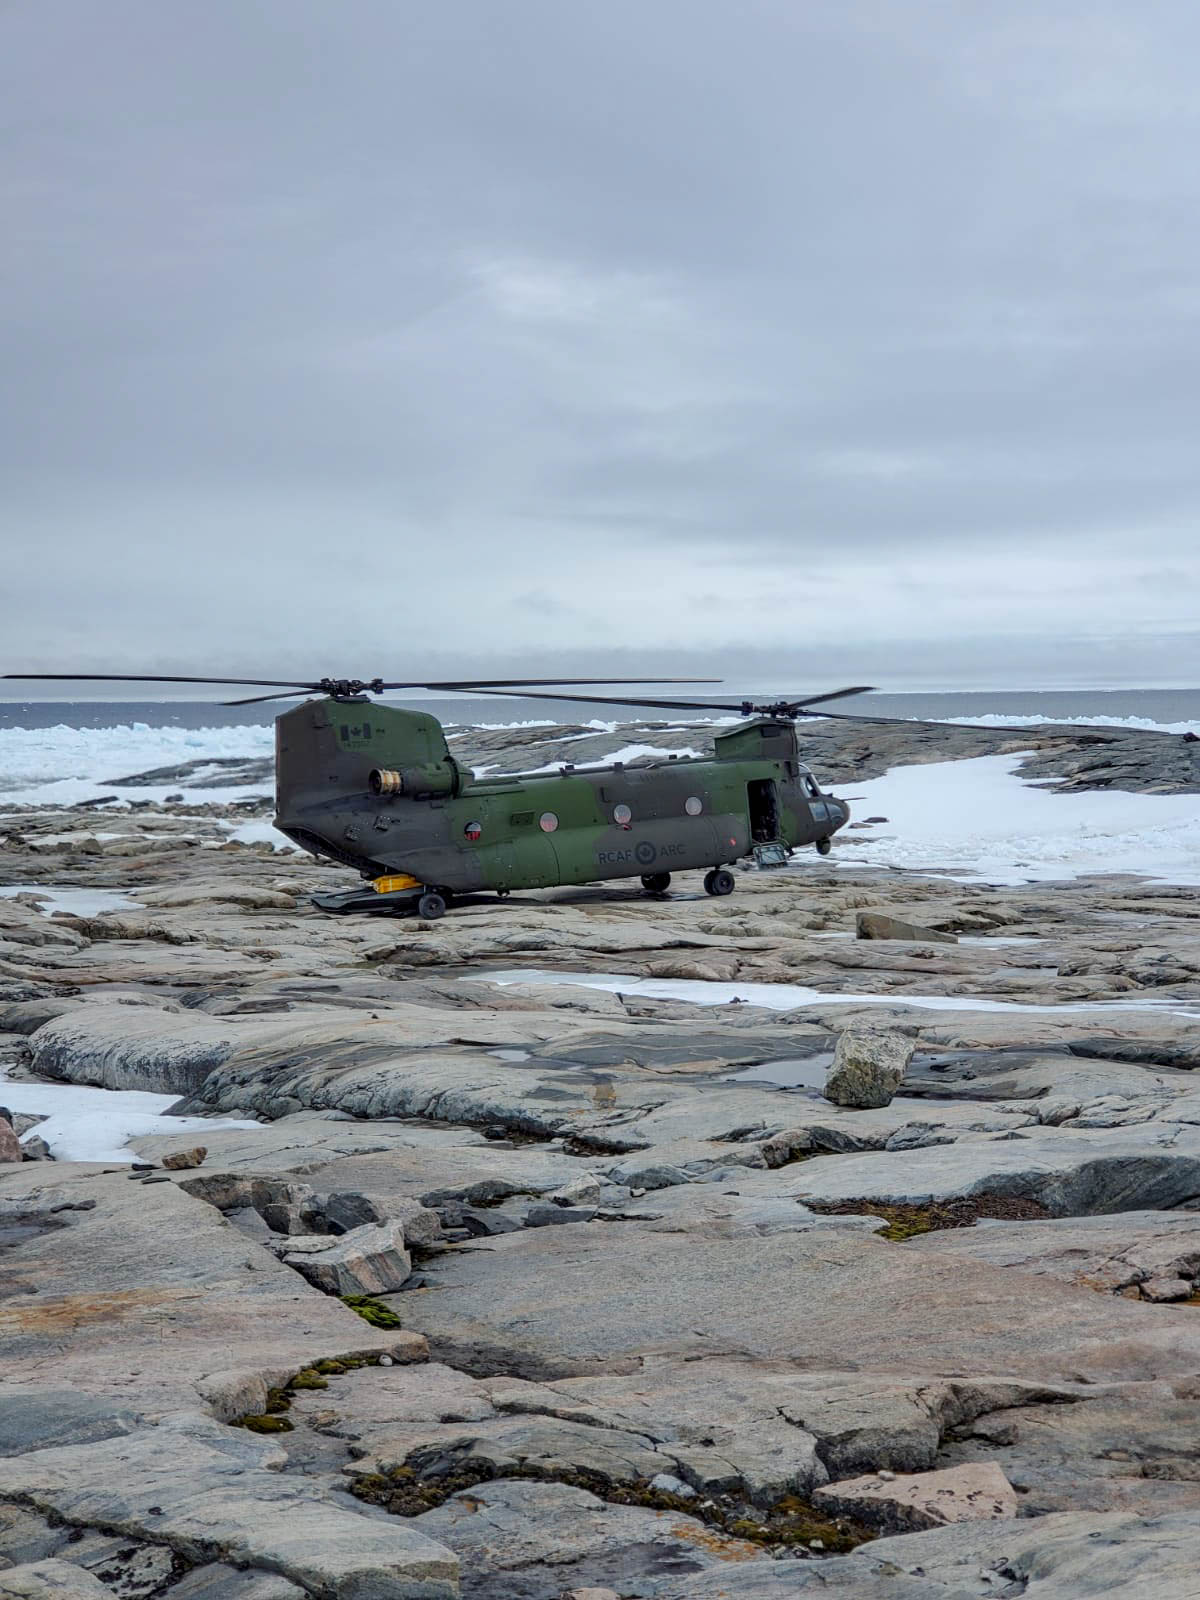 A big green and grey helicopter sits on rocks in an Arctic setting.